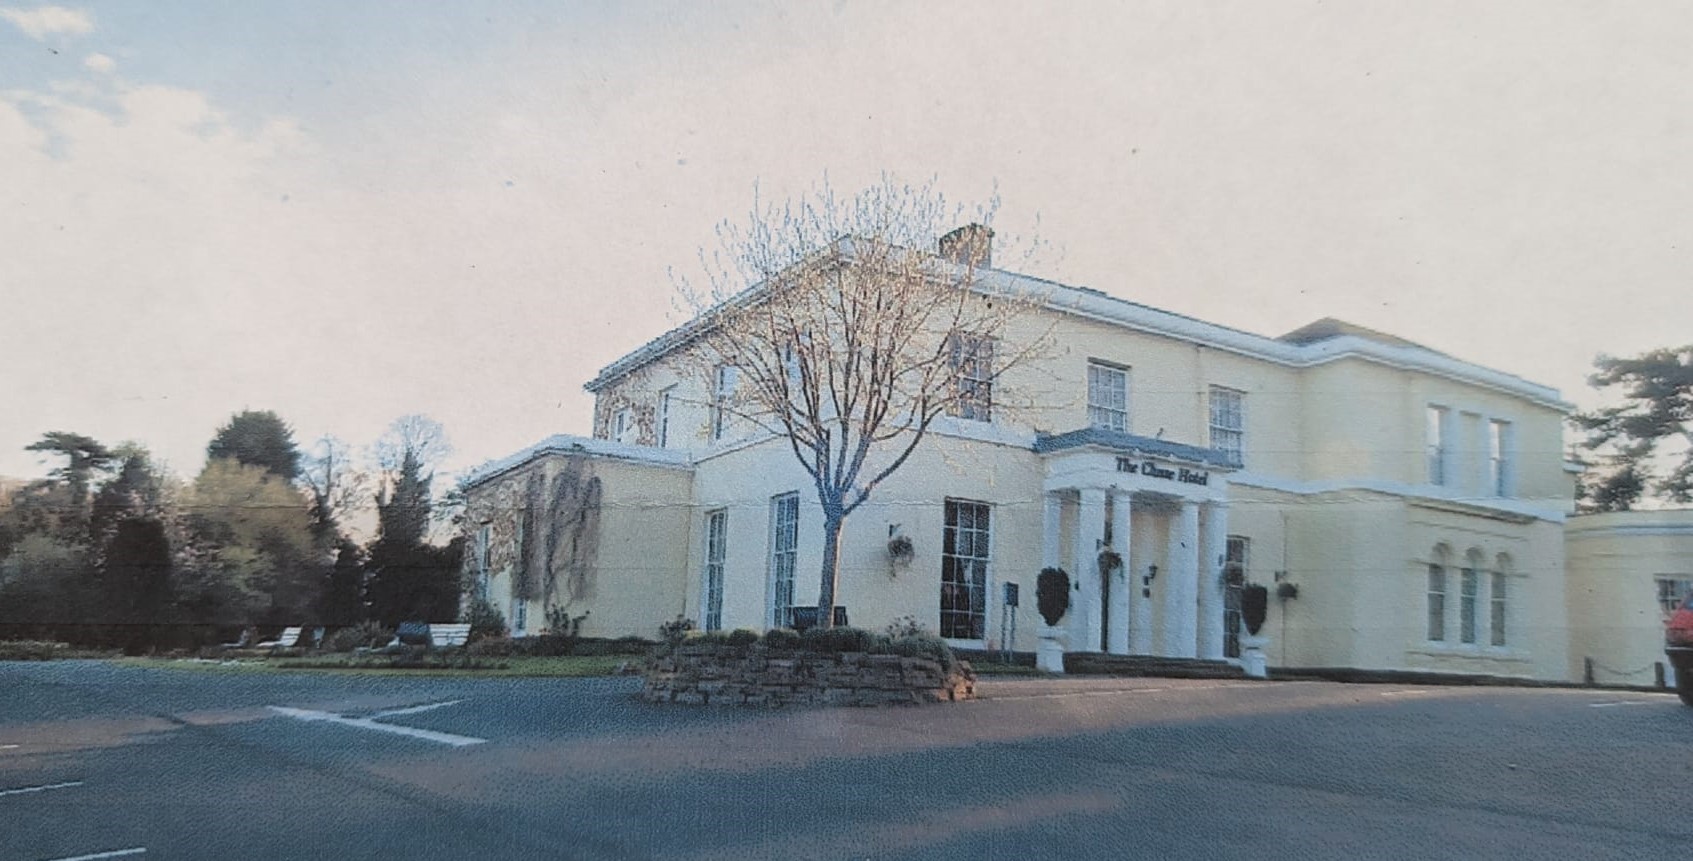 The Chase Hotel, Ross-on-Wye, 2005